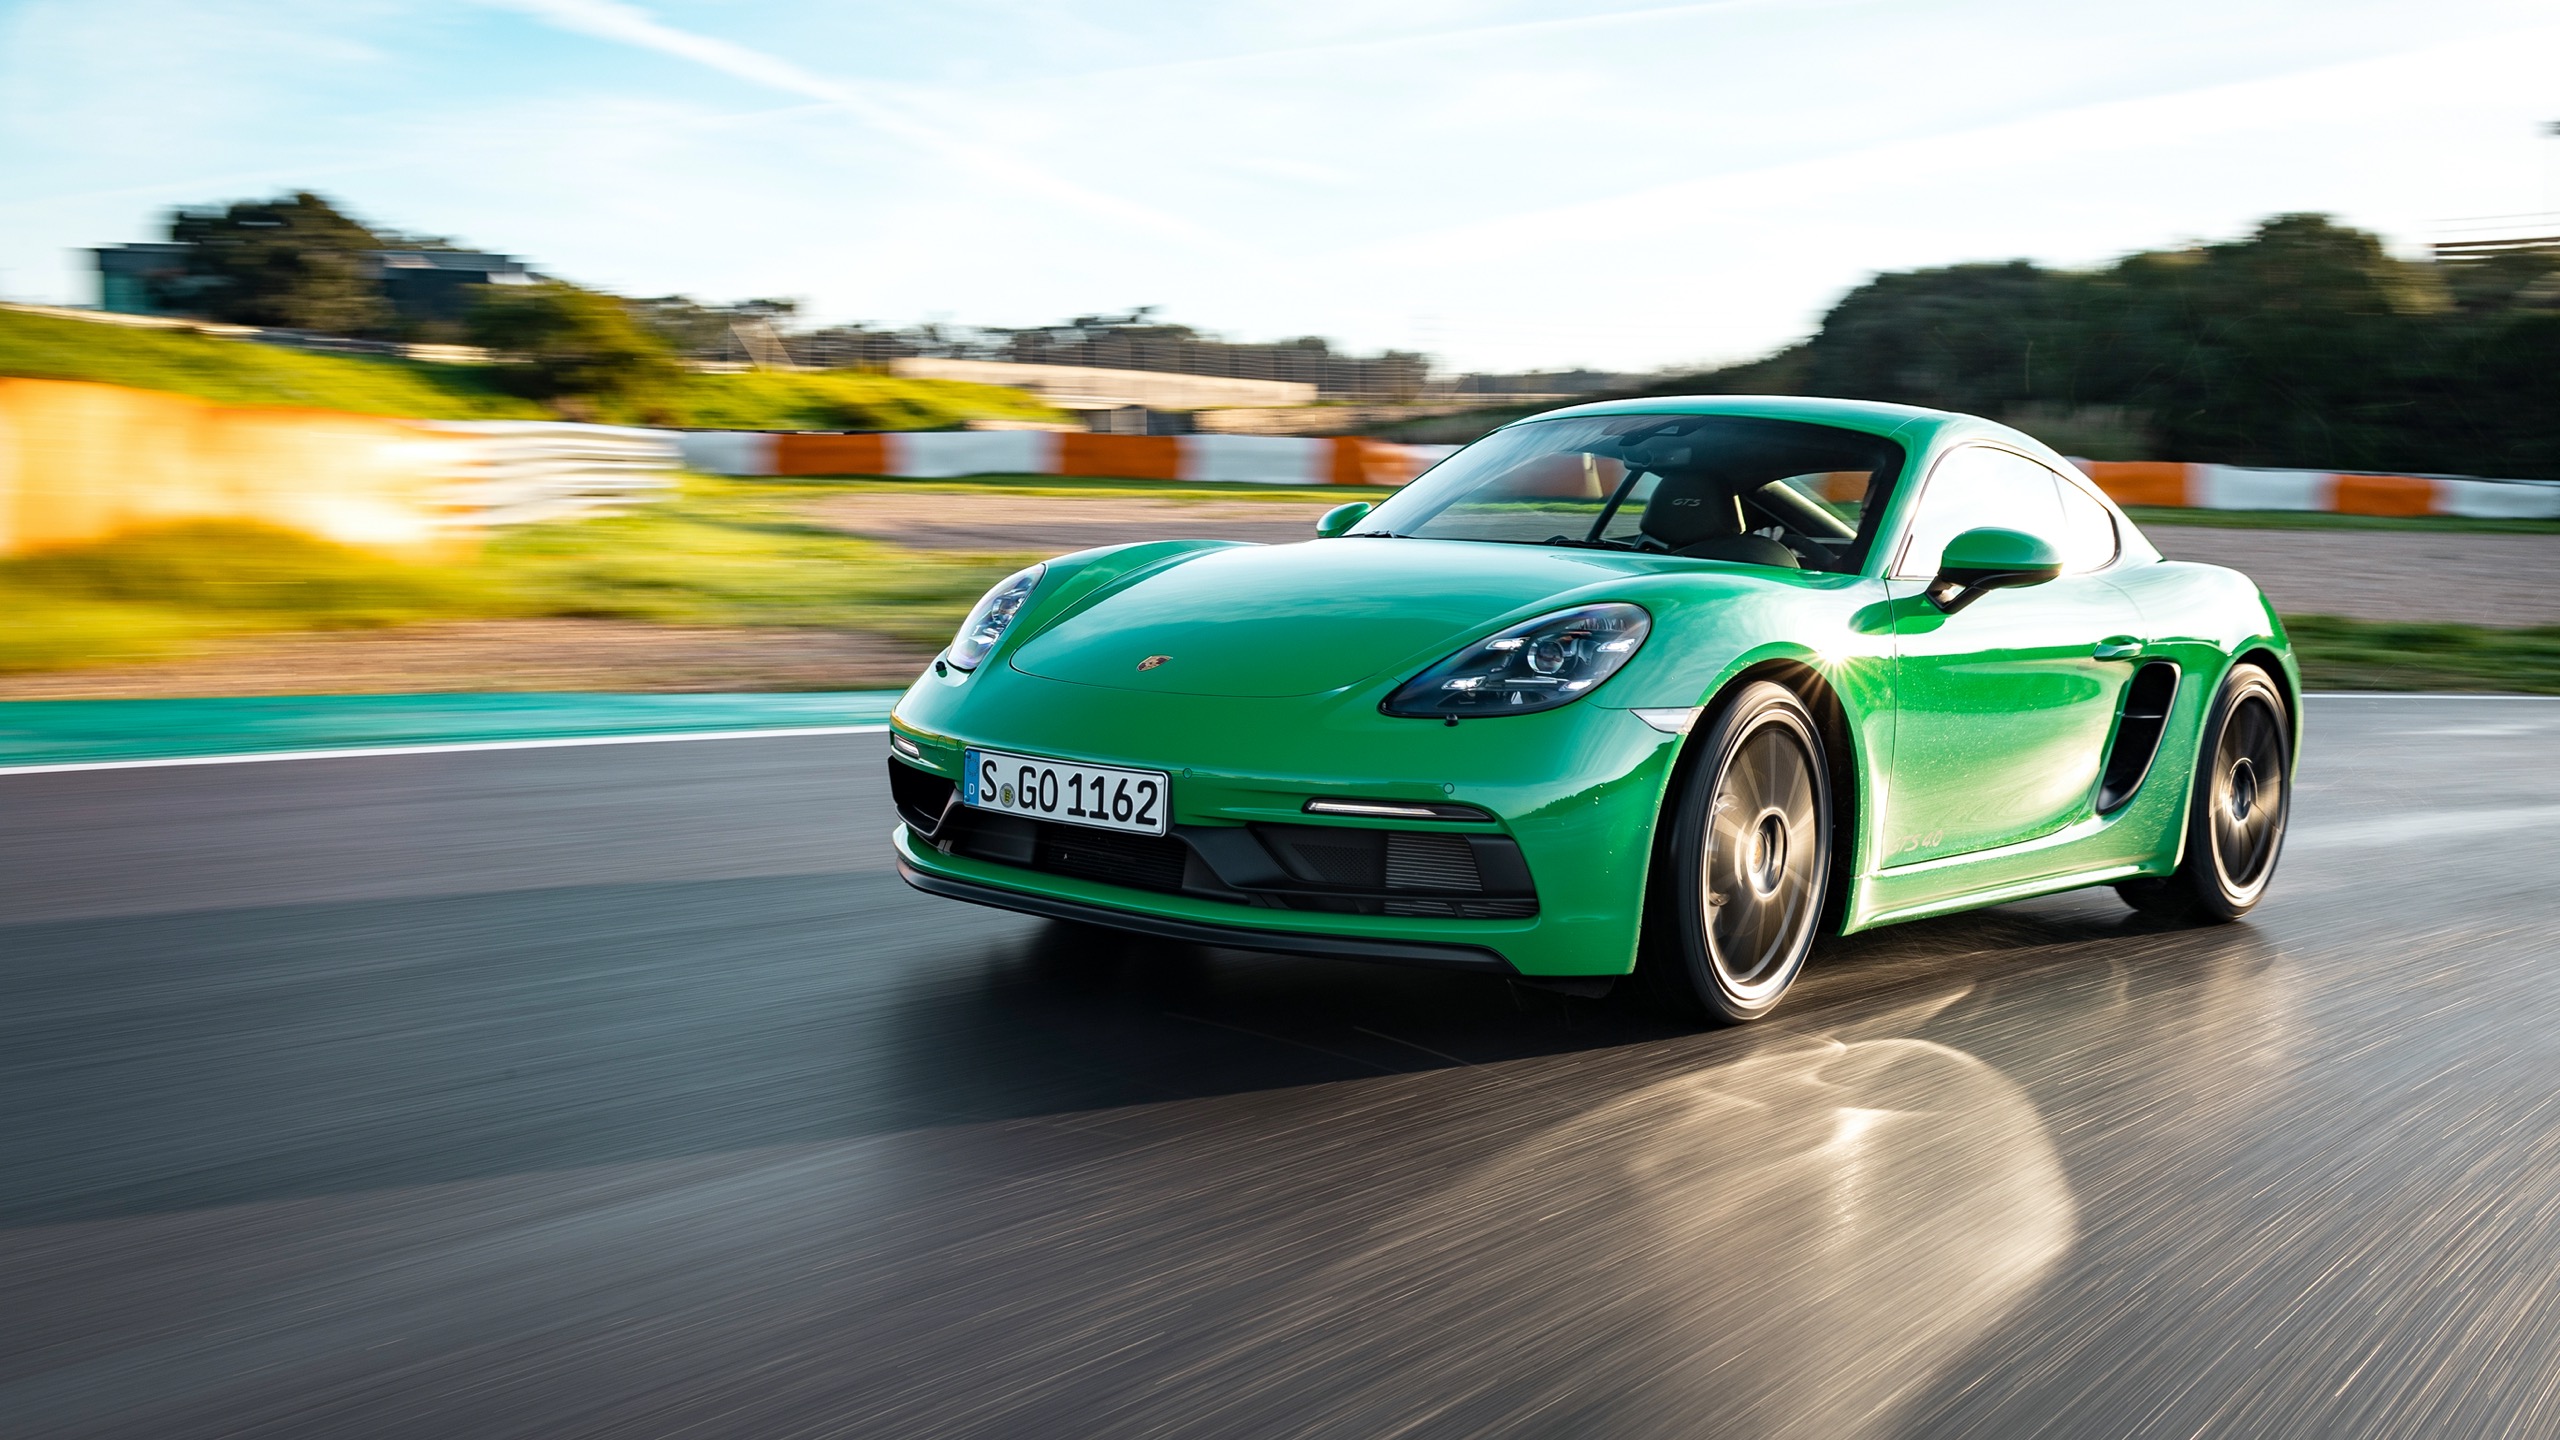 21 Porsche 718 Cayman Gts And Boxster Gts First Drive Review What S New 4 0 Liter Flat Six Lap Times Autoblog